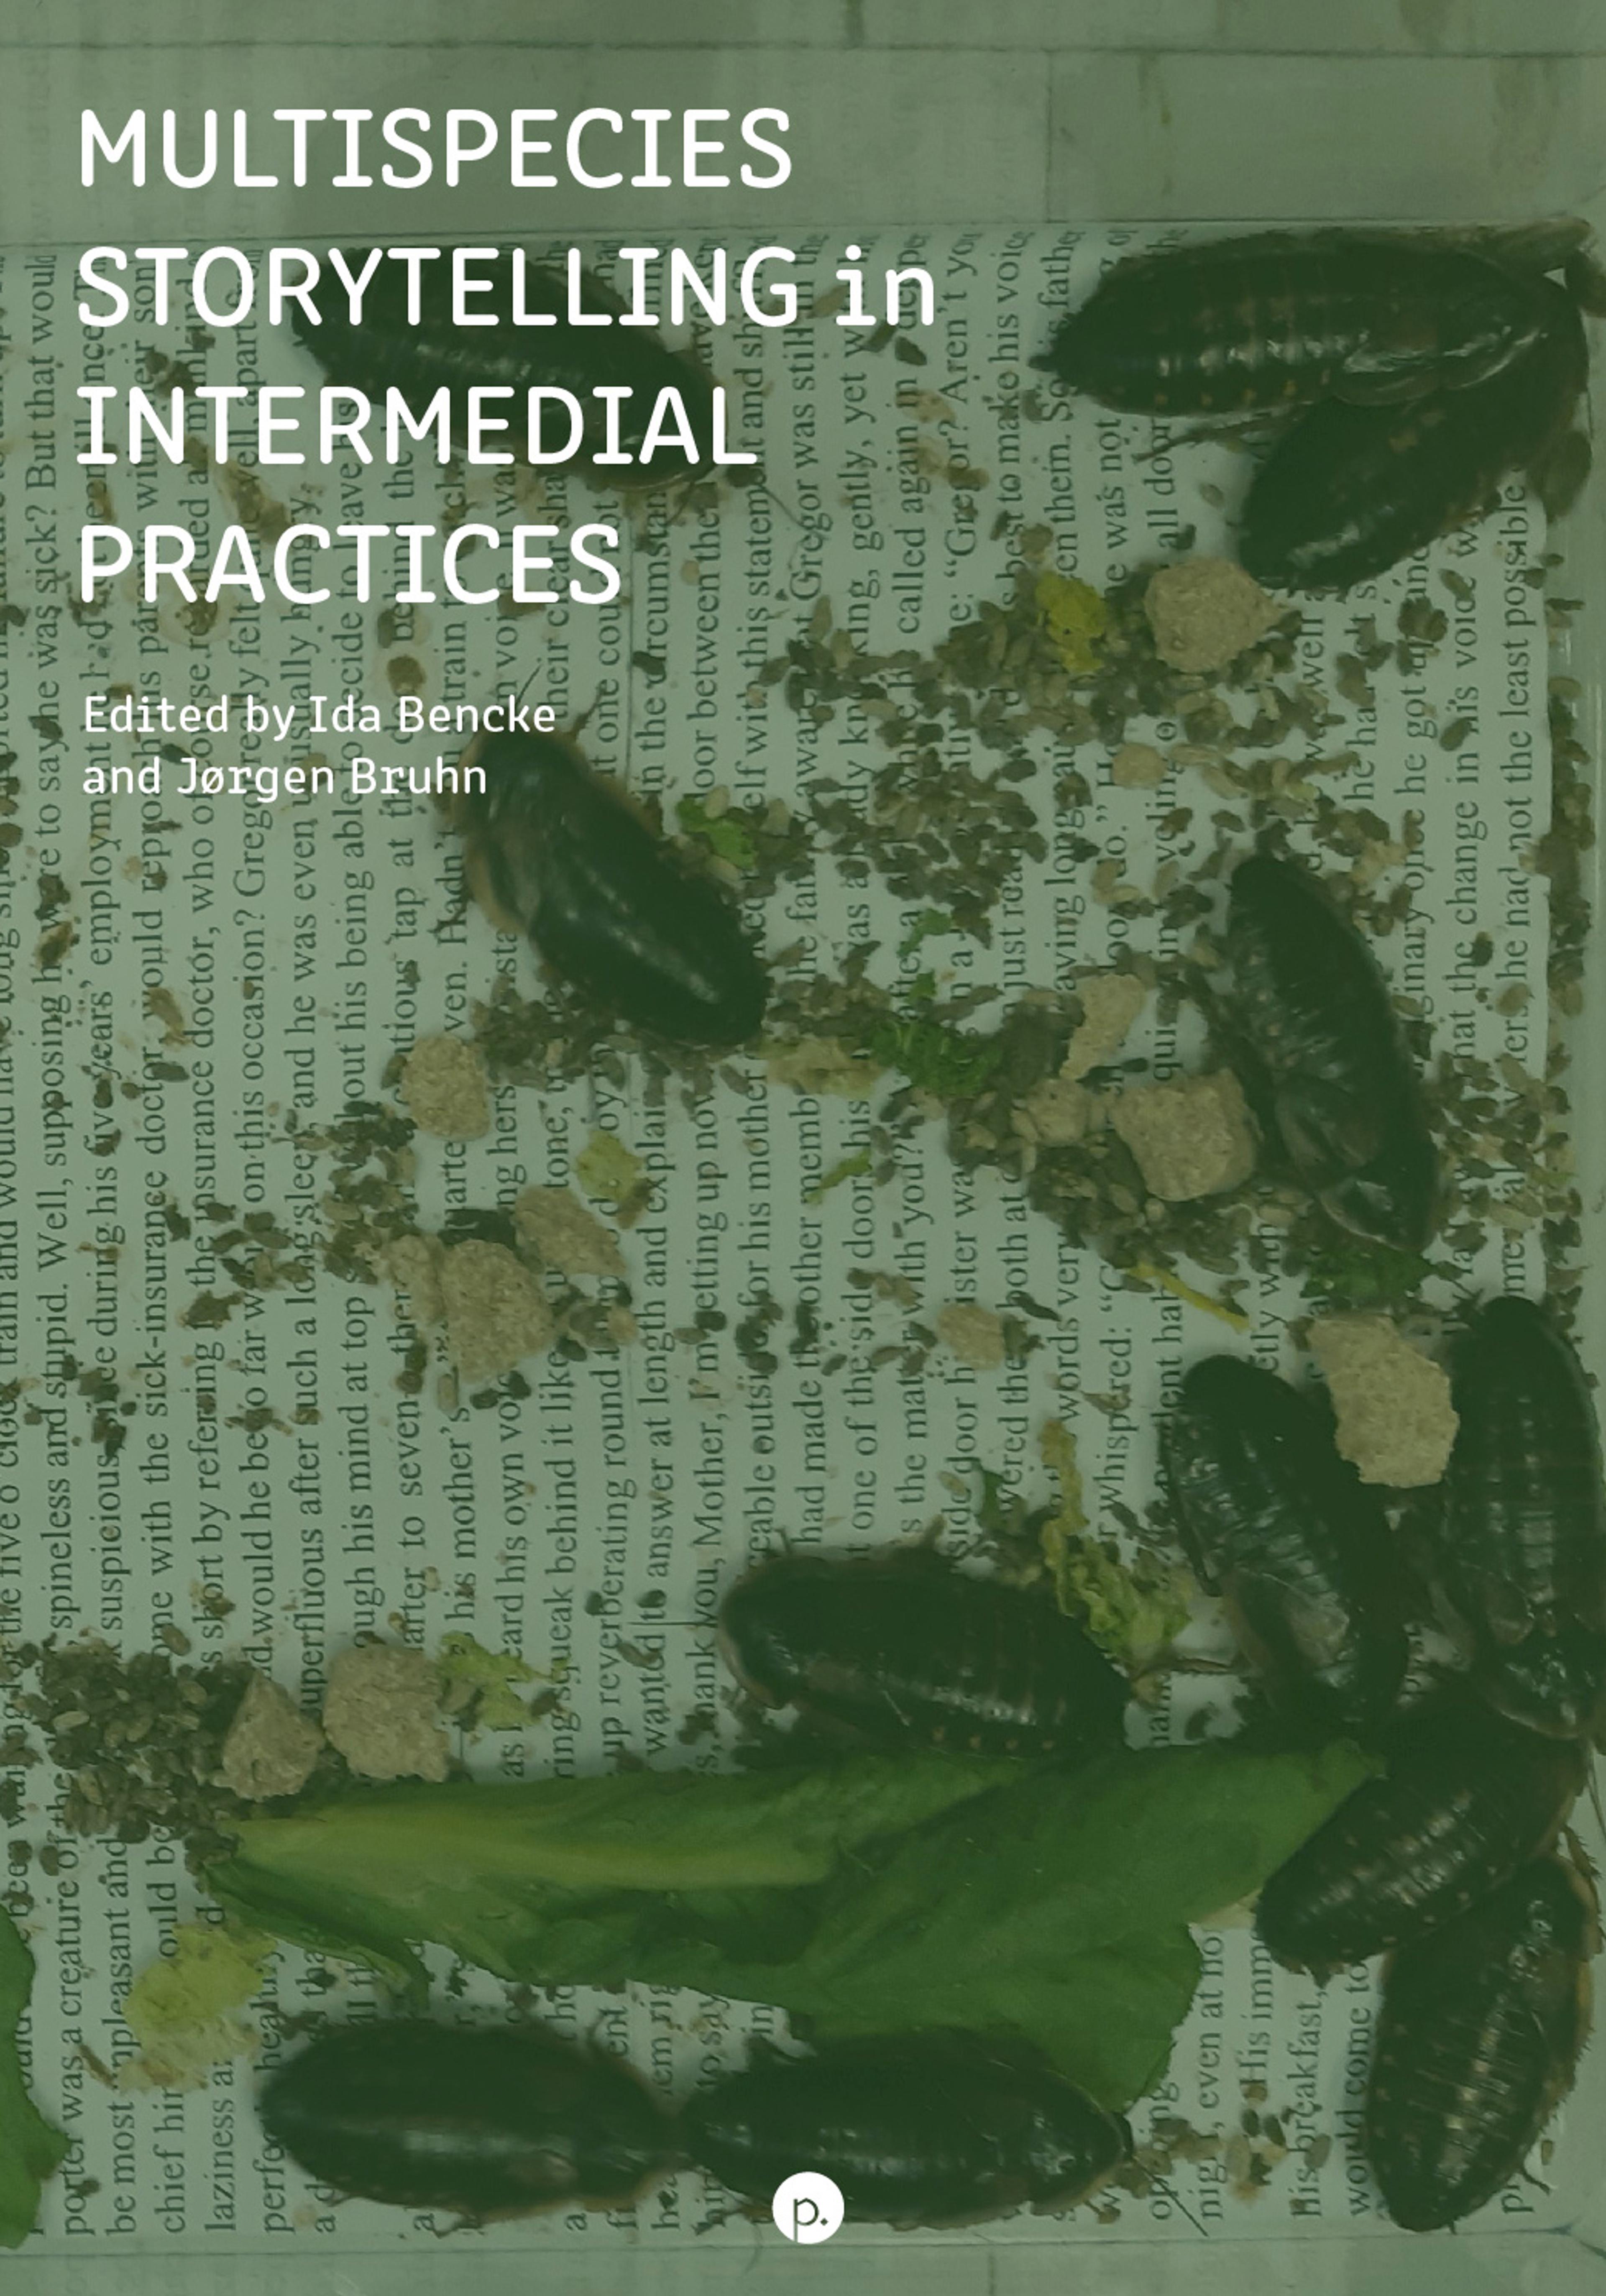 Cover of book titled Multispecies Storytelling in Intermedial Practices